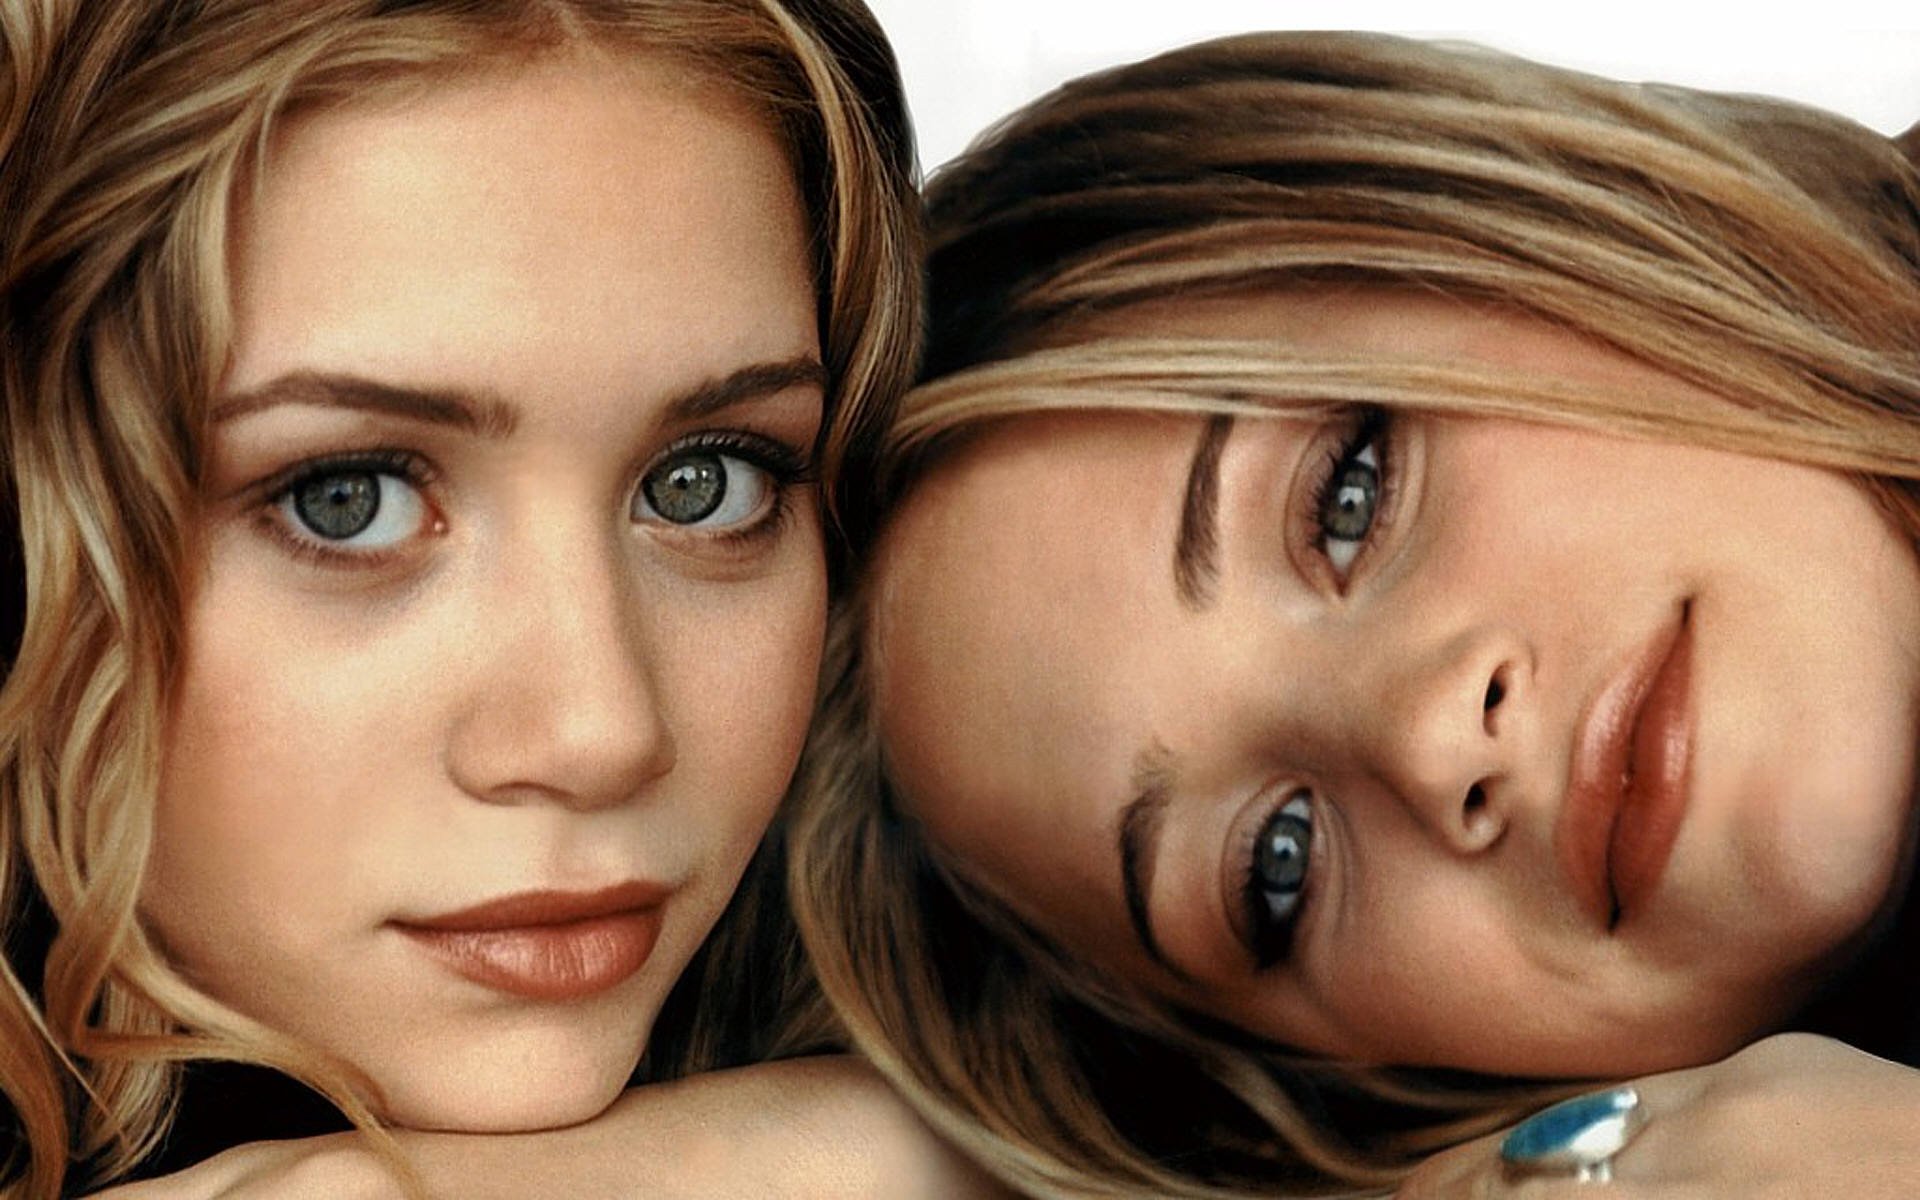 Olsen Twins Full HD Wallpaper and Background Image | 1920x1200 | ID:25679